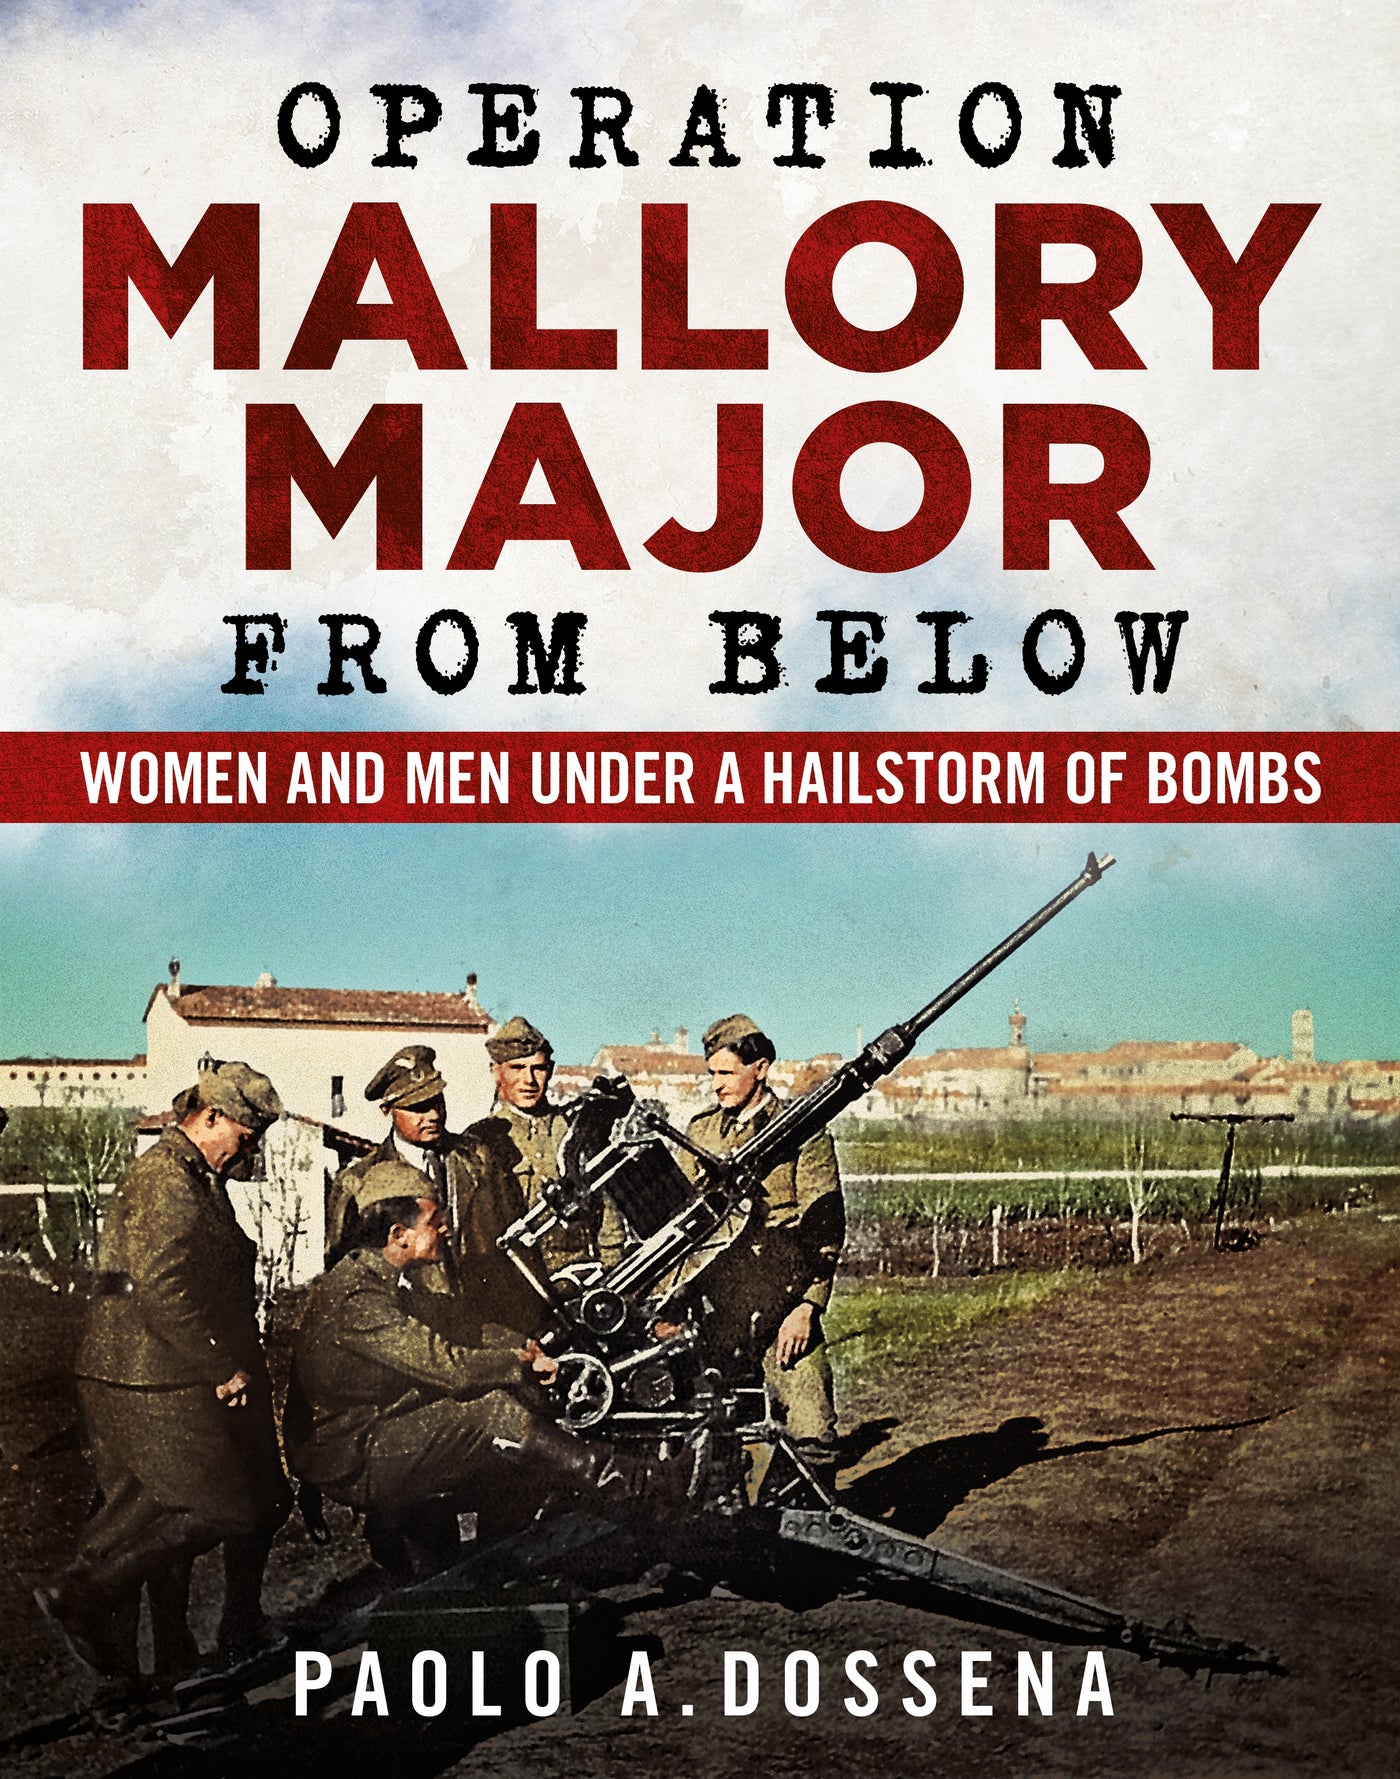 Operation Mallory Major from Below